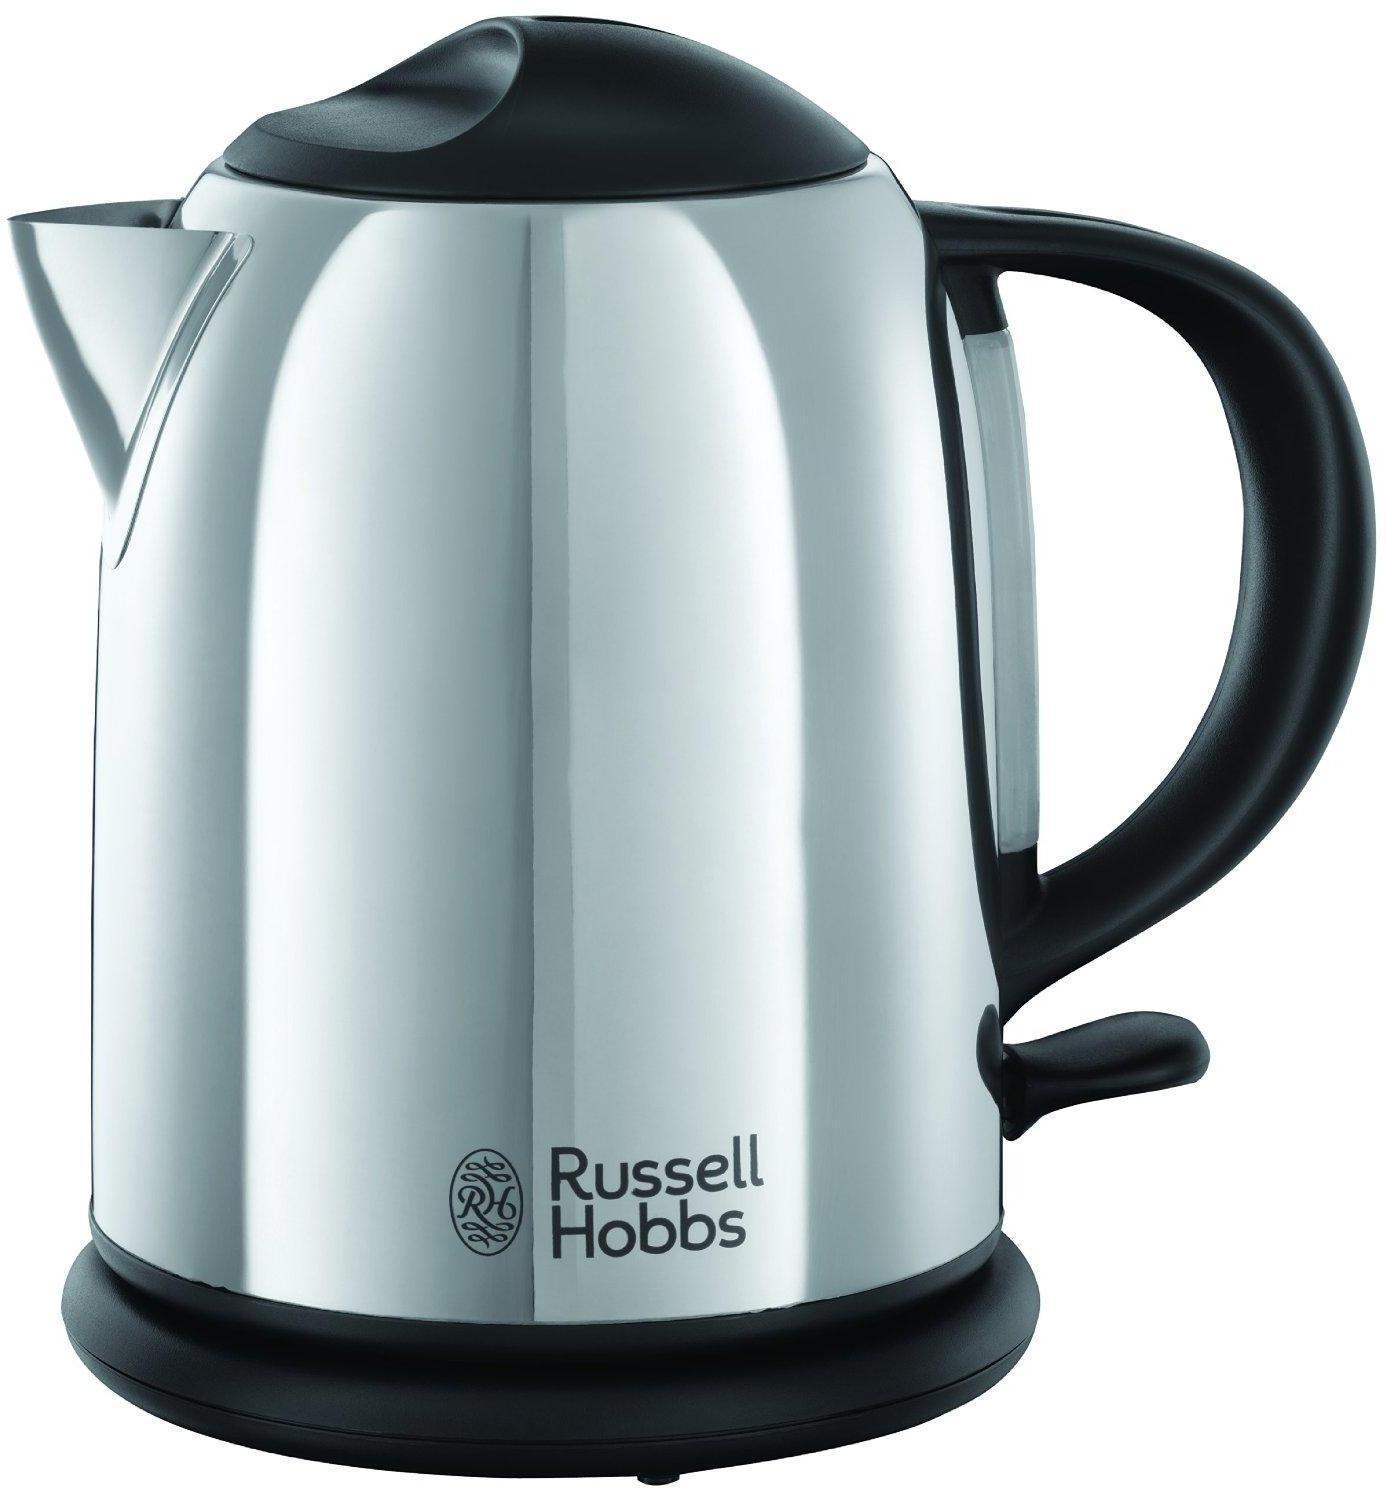 Russell Hobbs Chester Compact 1 litre 20190-70 kuvalo